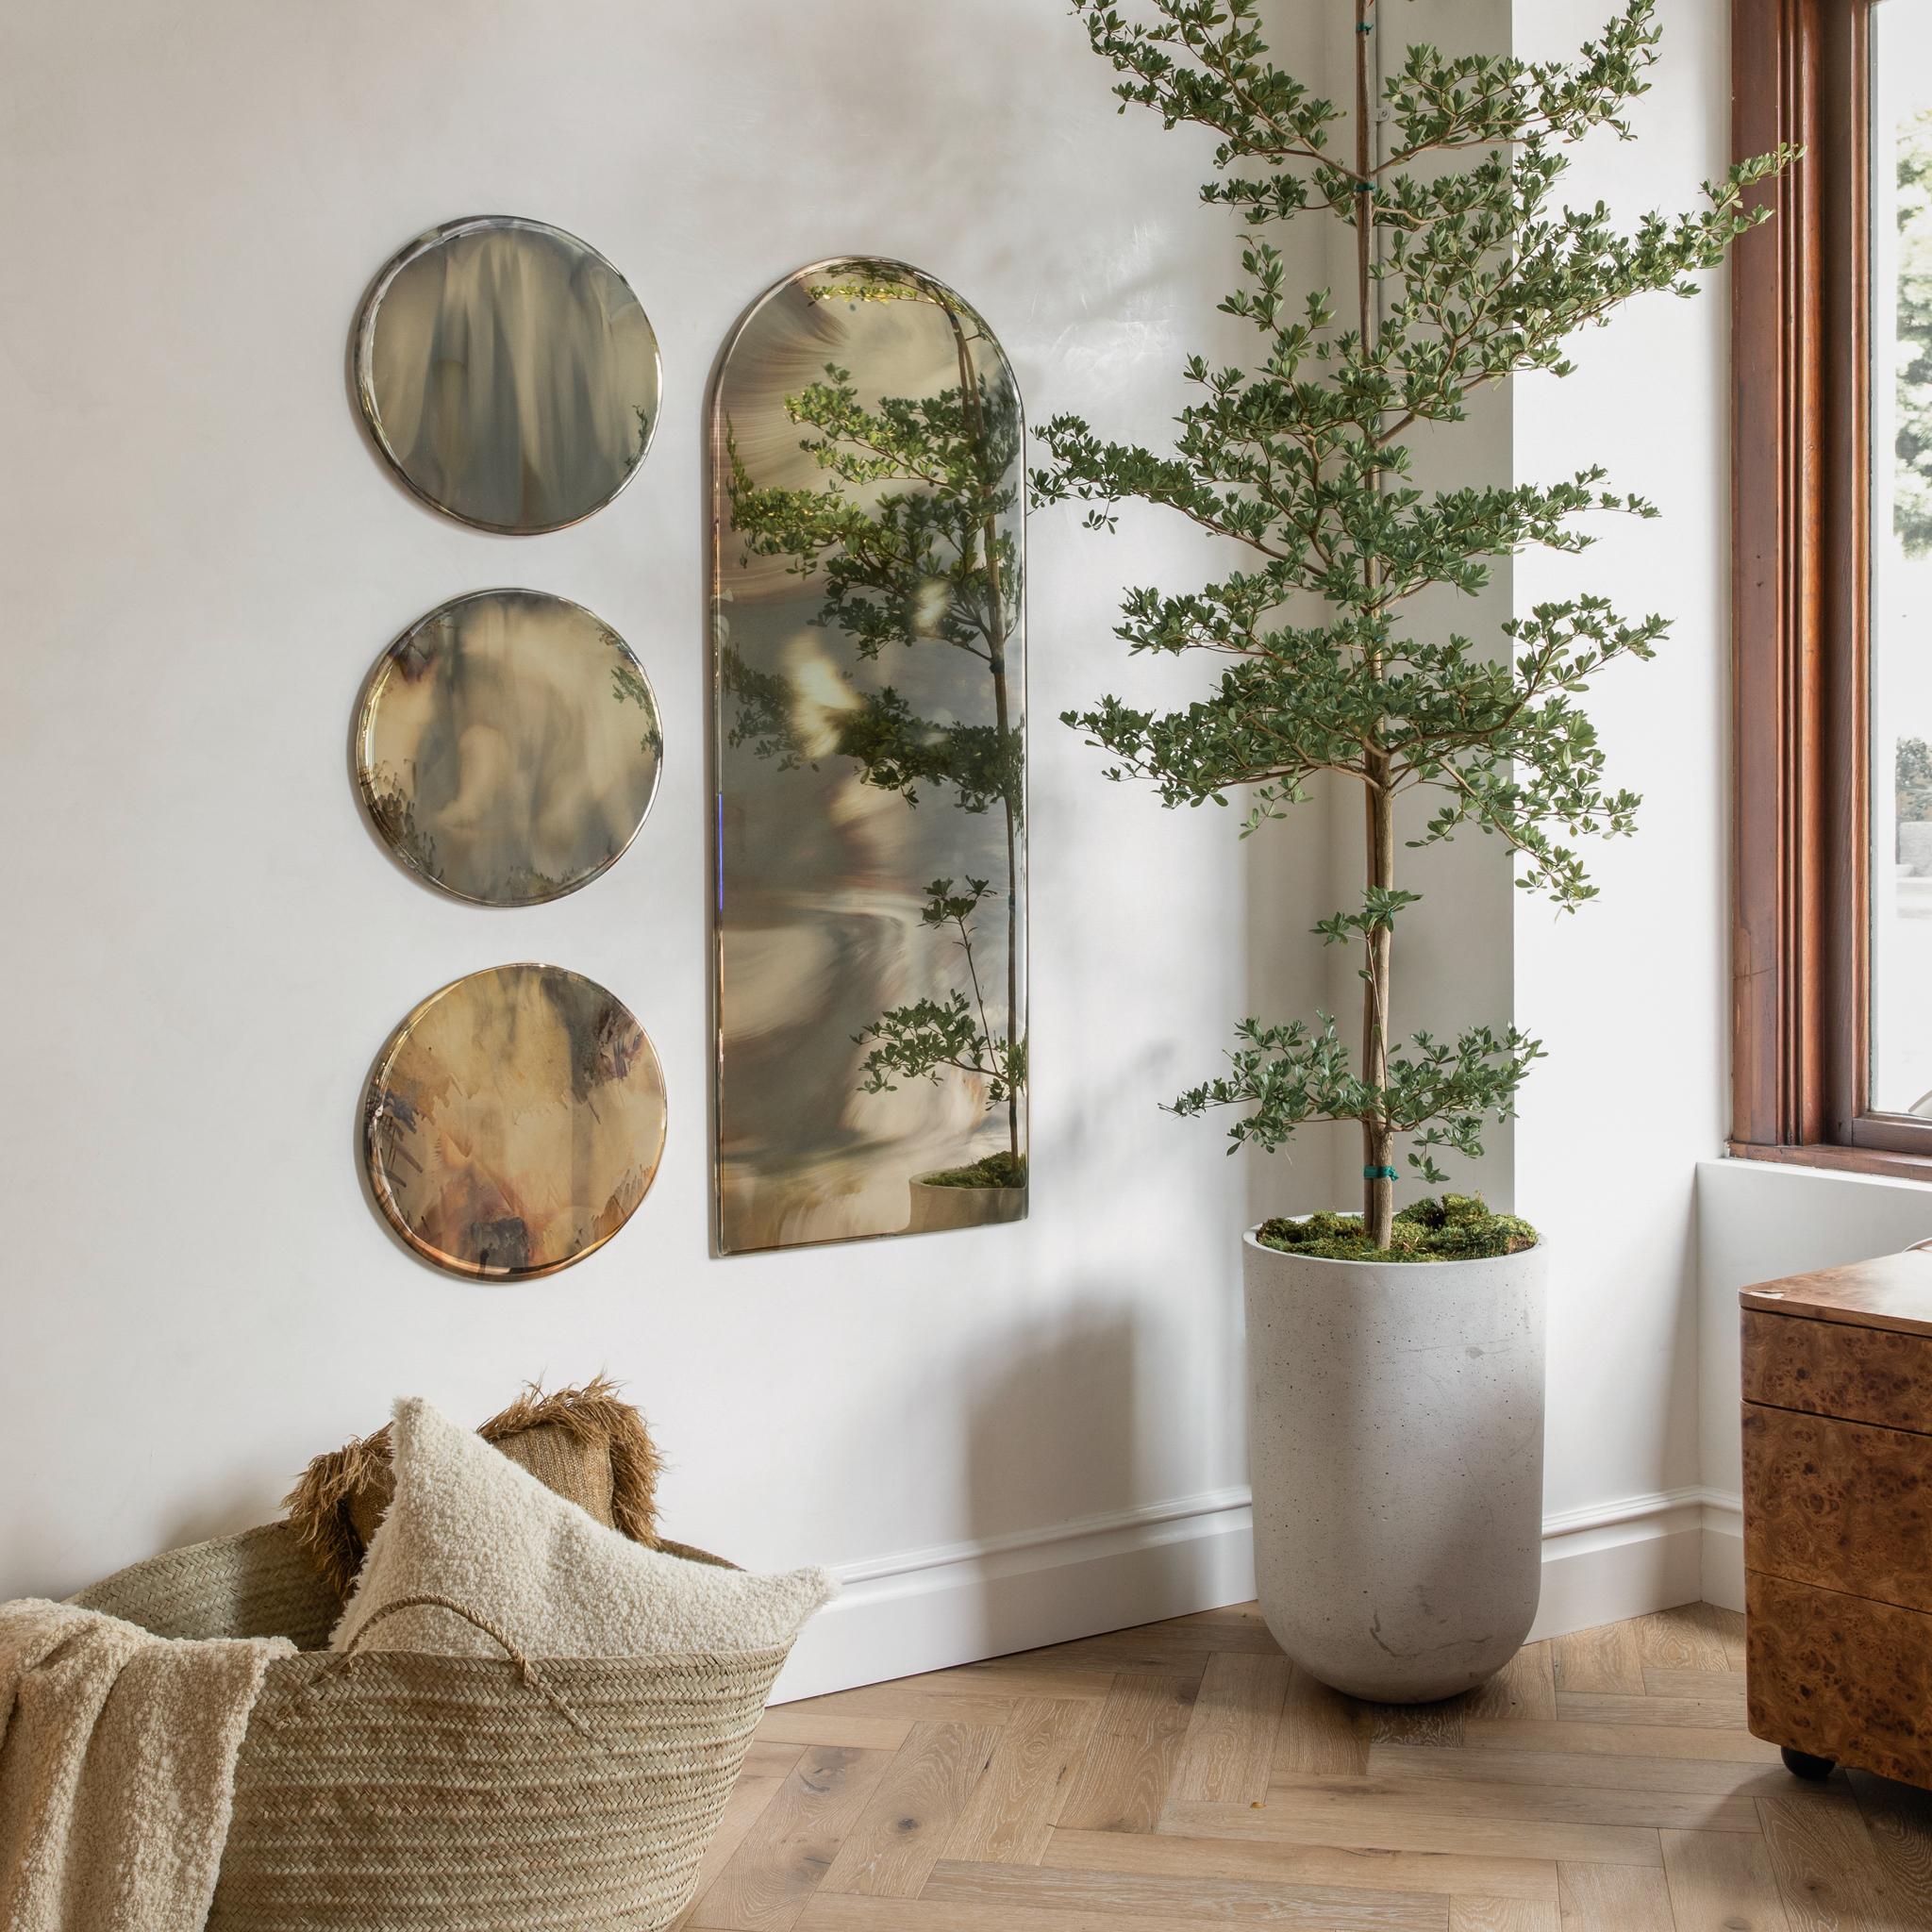 The Not-So-Vain antiqued mirror is handmade in San Diego, Ca. 
Inspired by vintage mirrors found at Flea Markets in Paris, we created our own one-of-a-kind mirrors that are truly a statement on their own. We offer the finest hand silvered glass